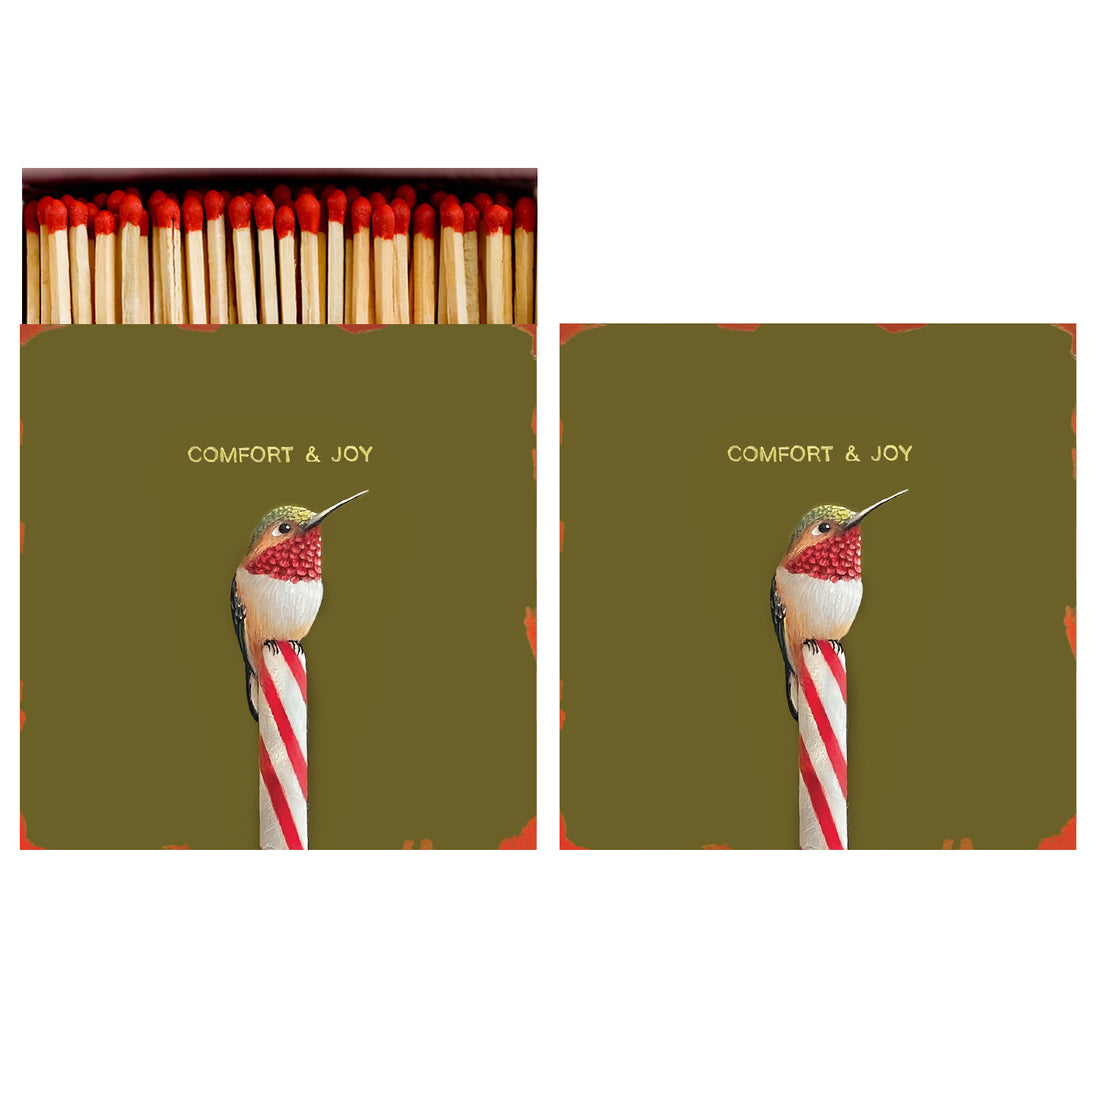 Two identical sides of a square match box, the left of which is open slightly to reveal the matches inside. The artwork on the box depicts a white, red and green hummingbird perched on a candy cane on an olive green background, with &quot;COMFORT &amp; JOY&quot; printed in gold.